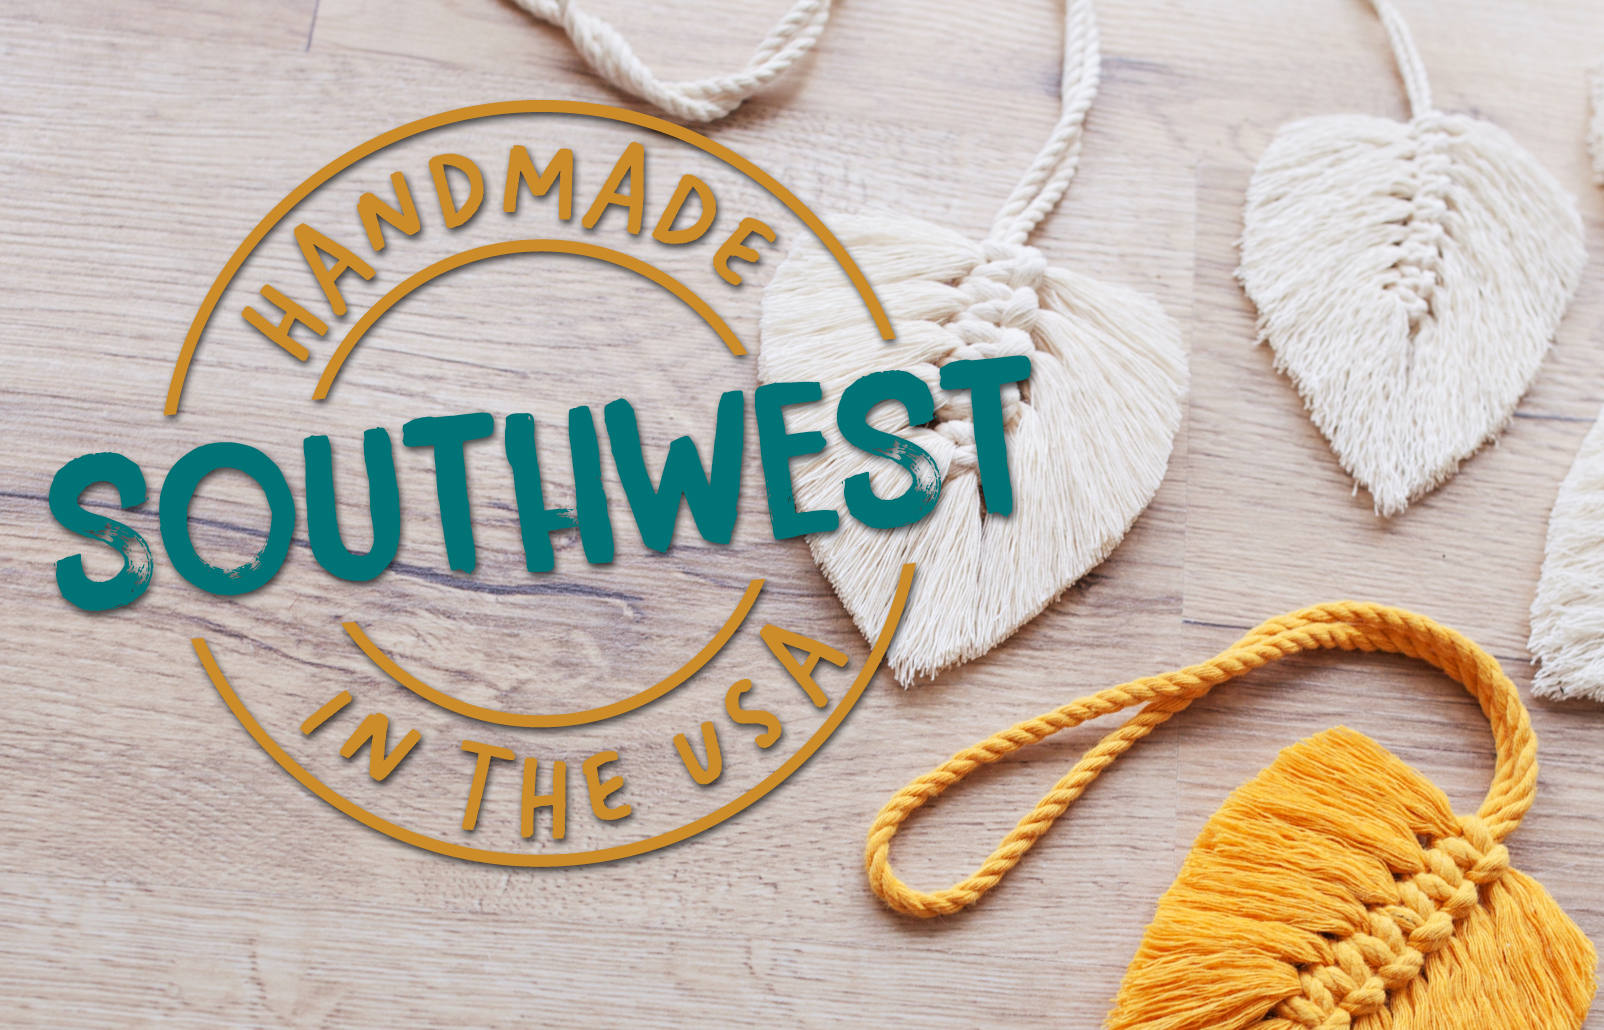 Shop Local: Handmade in the Southwest